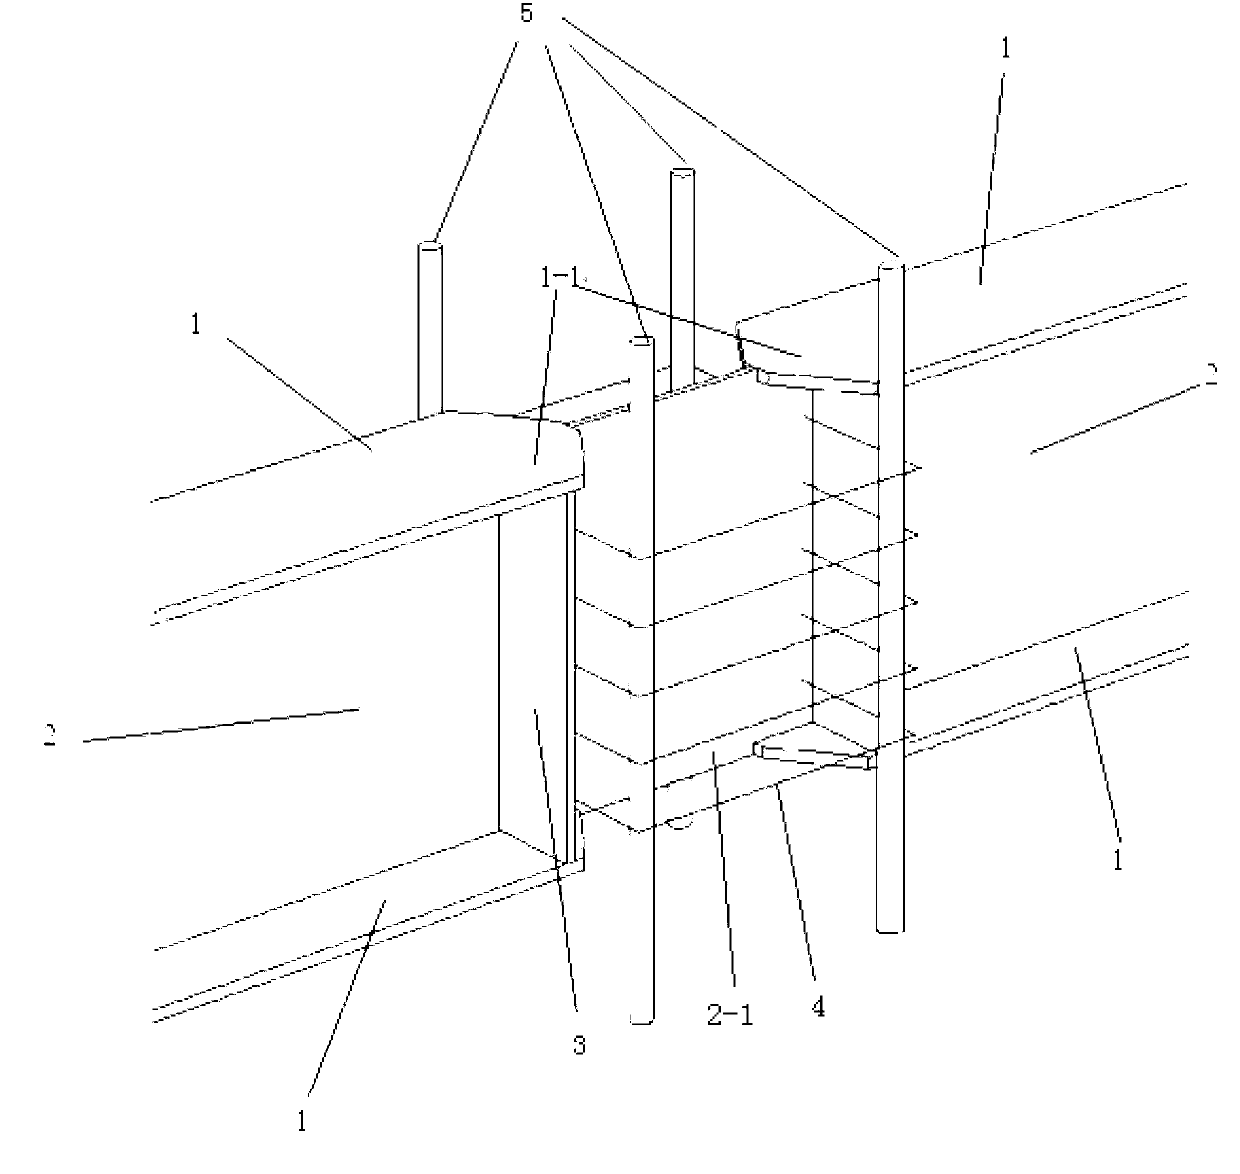 RCS (reinforced concrete structure) combined node with continuous webs and partially-cut flanges